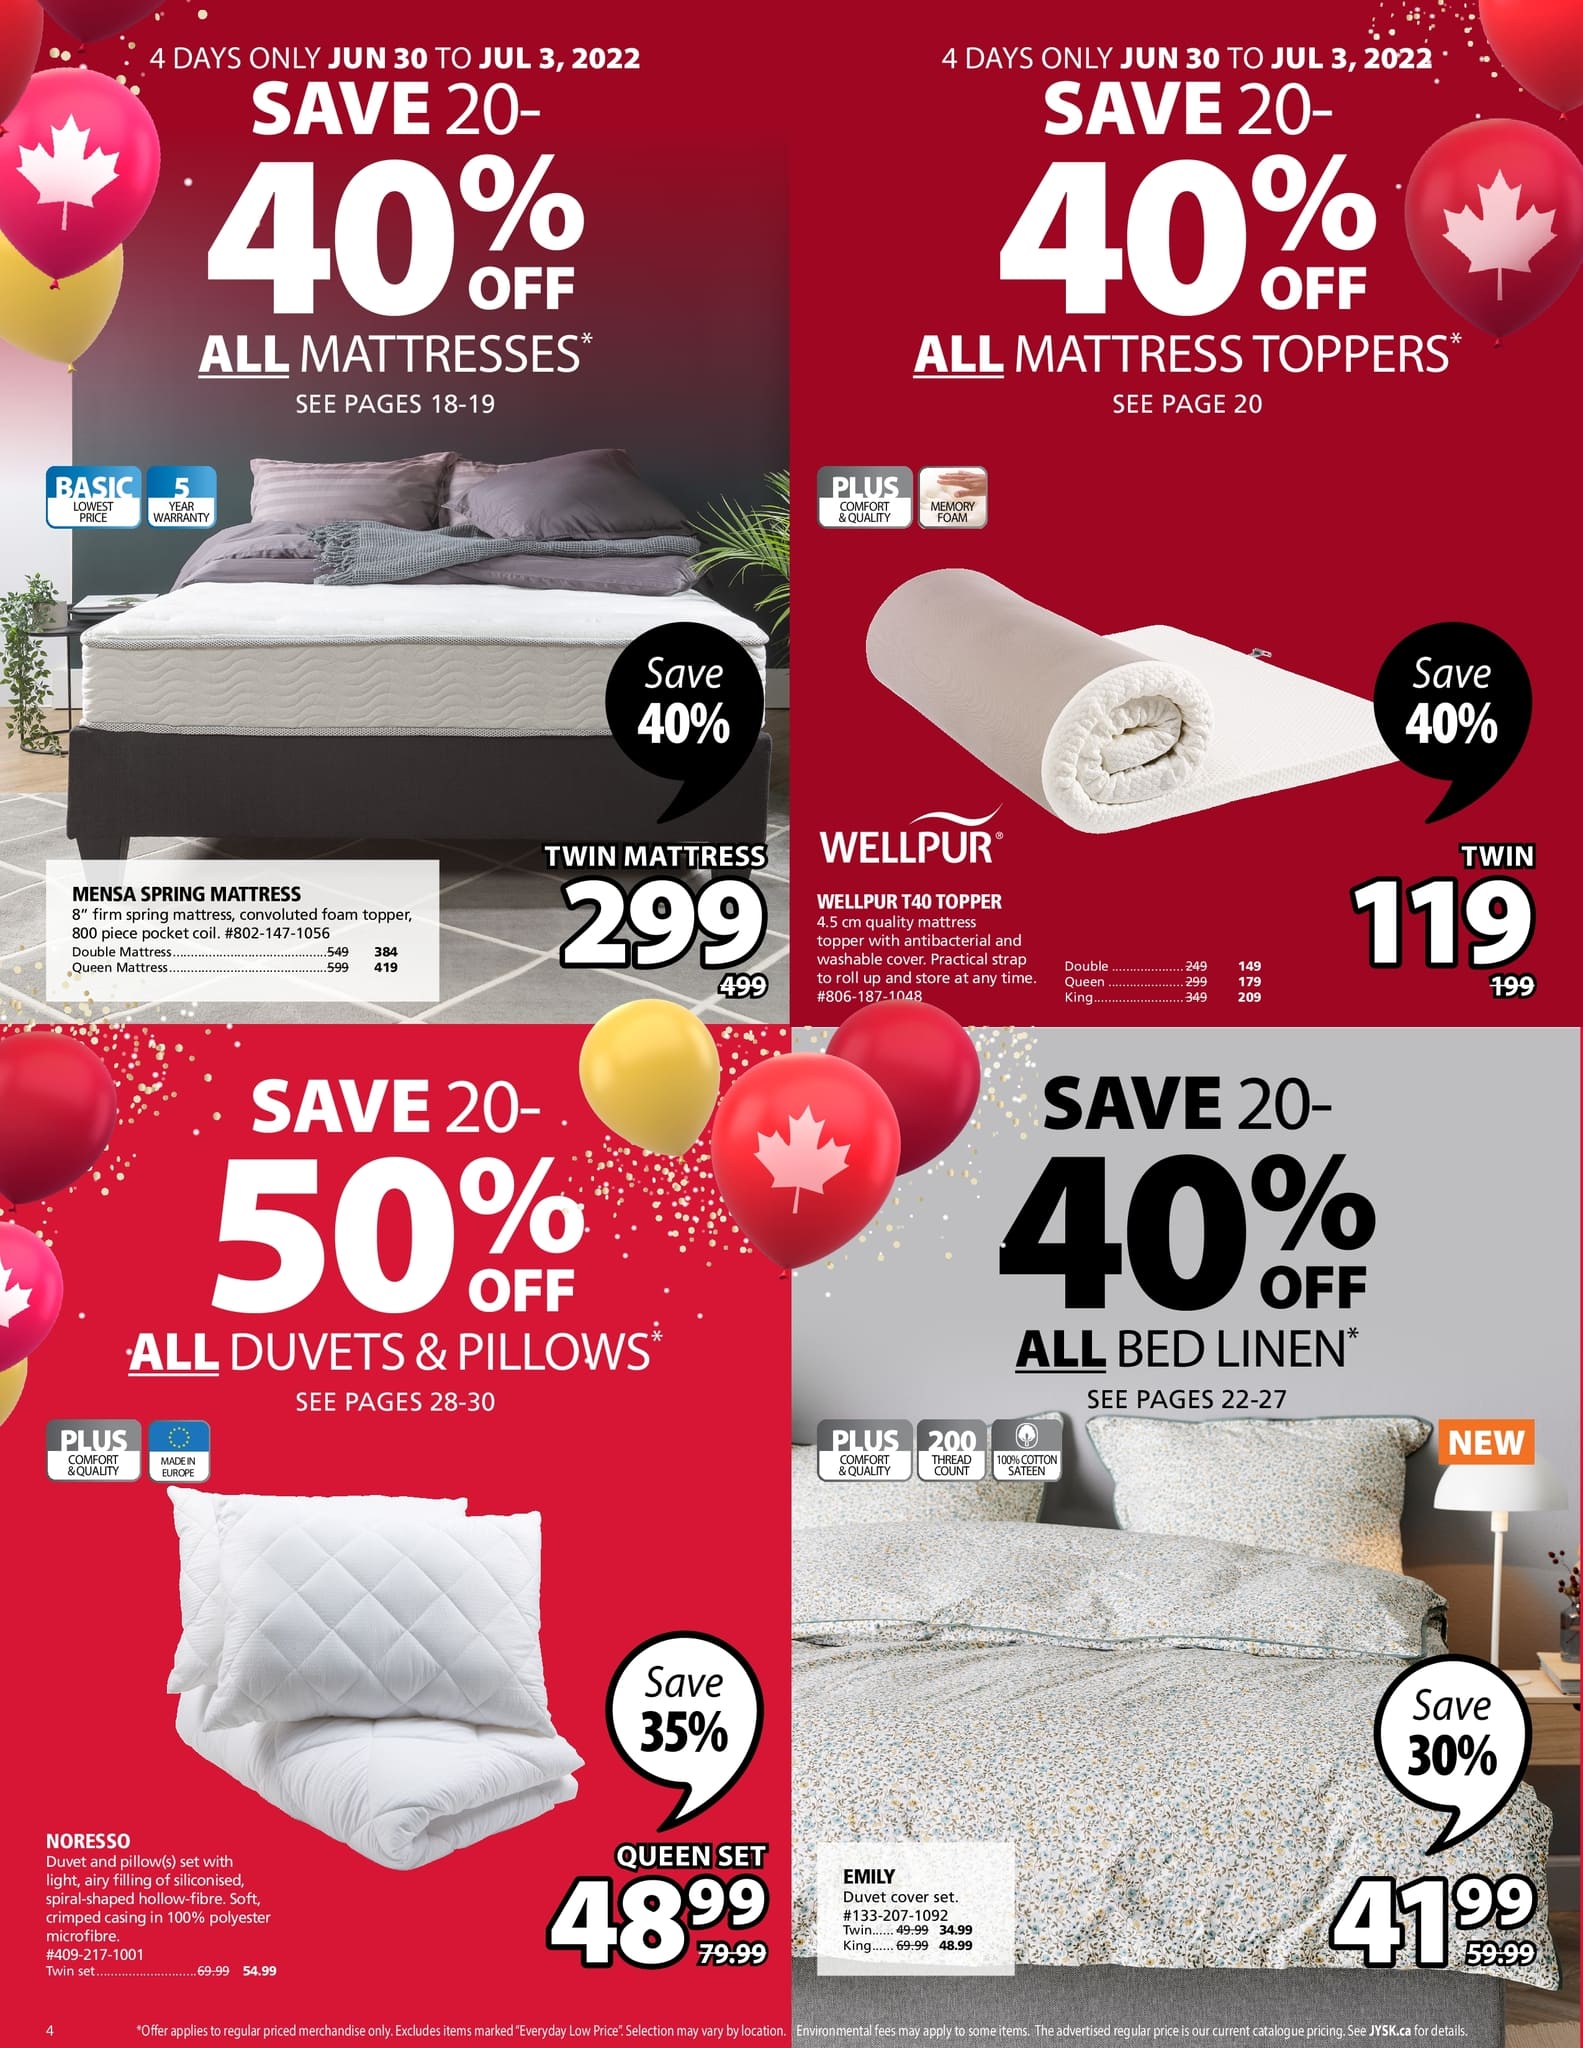 Jysk - Weekly Flyer Specials - Page 4